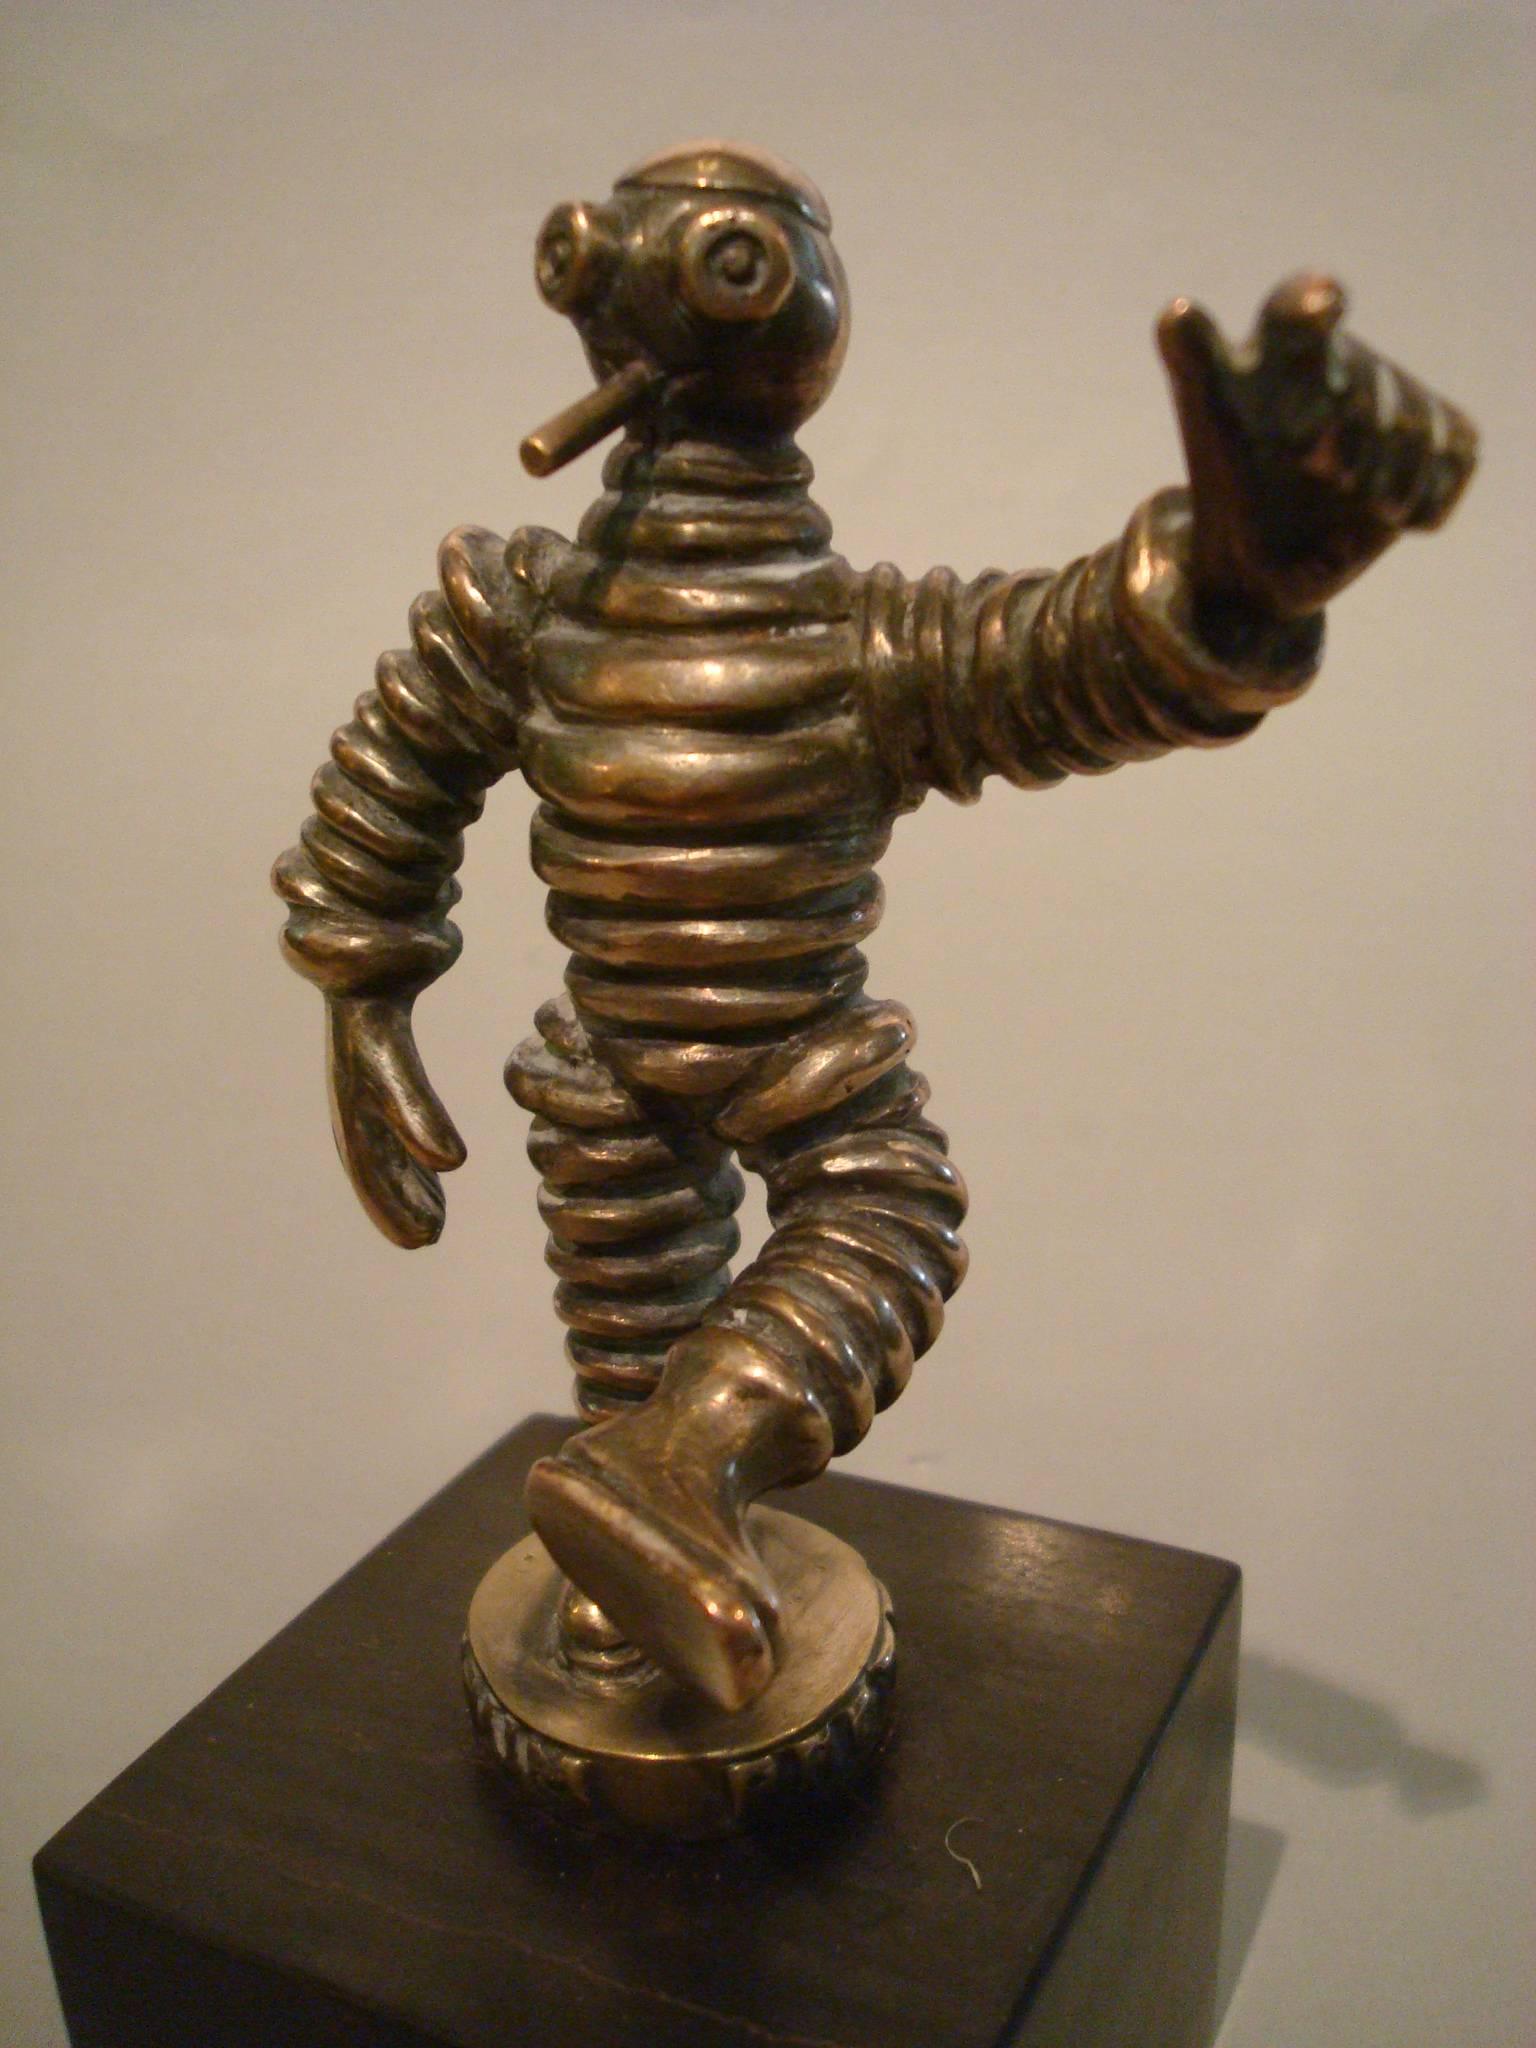 An early 'Bibendum Protégé' Car mascot - Hood Ornament, French, circa 1910,
nickel-plated bronze figure of a 'slim' Mr. Bibendum, mounted on marble base. Perfect for any Classic car or vintage Automobilia collector. Looks great as a paperweight.